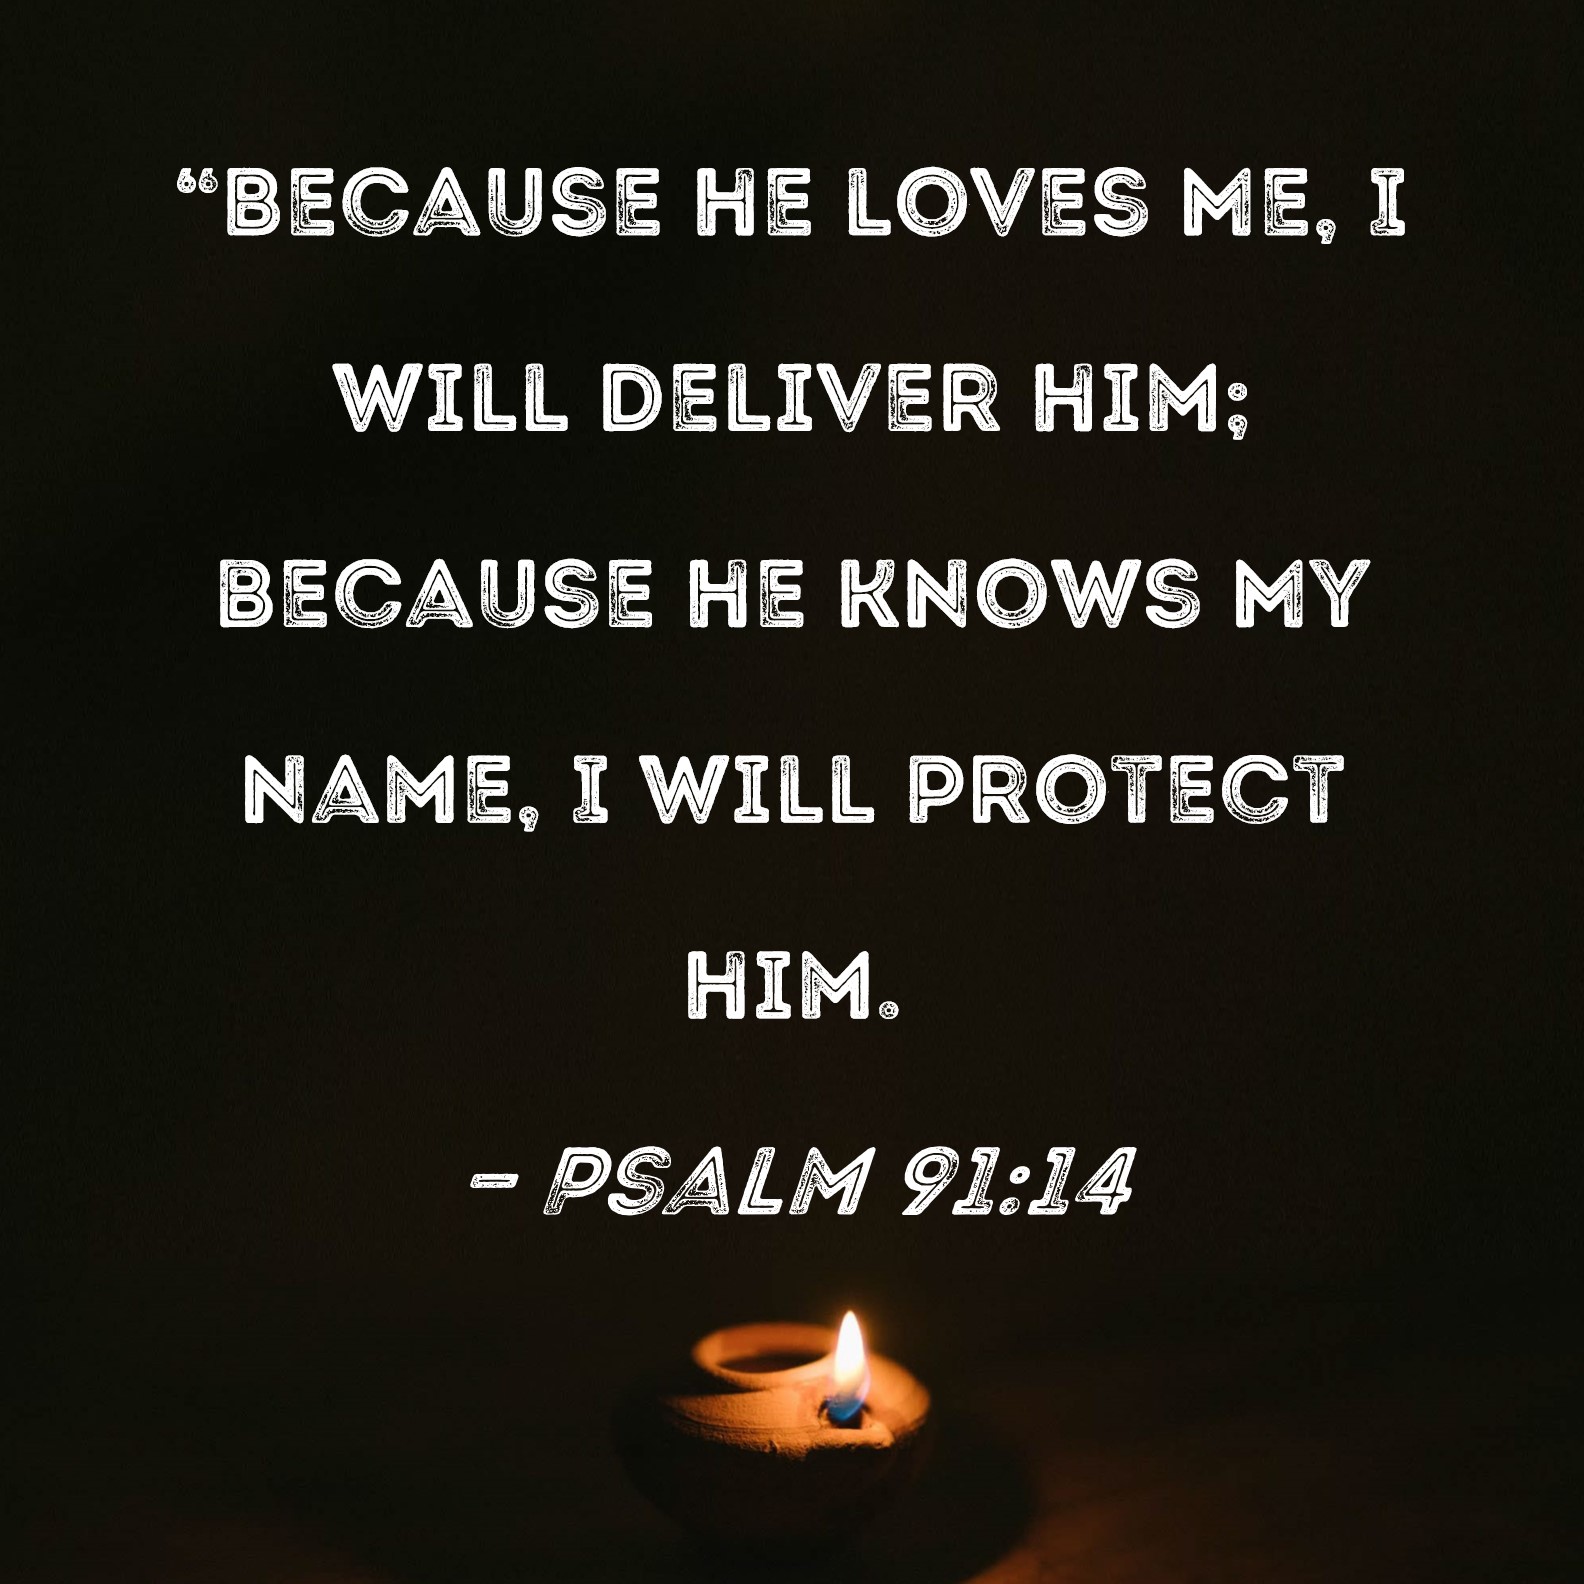 psalm-91-14-because-he-loves-me-i-will-deliver-him-because-he-knows